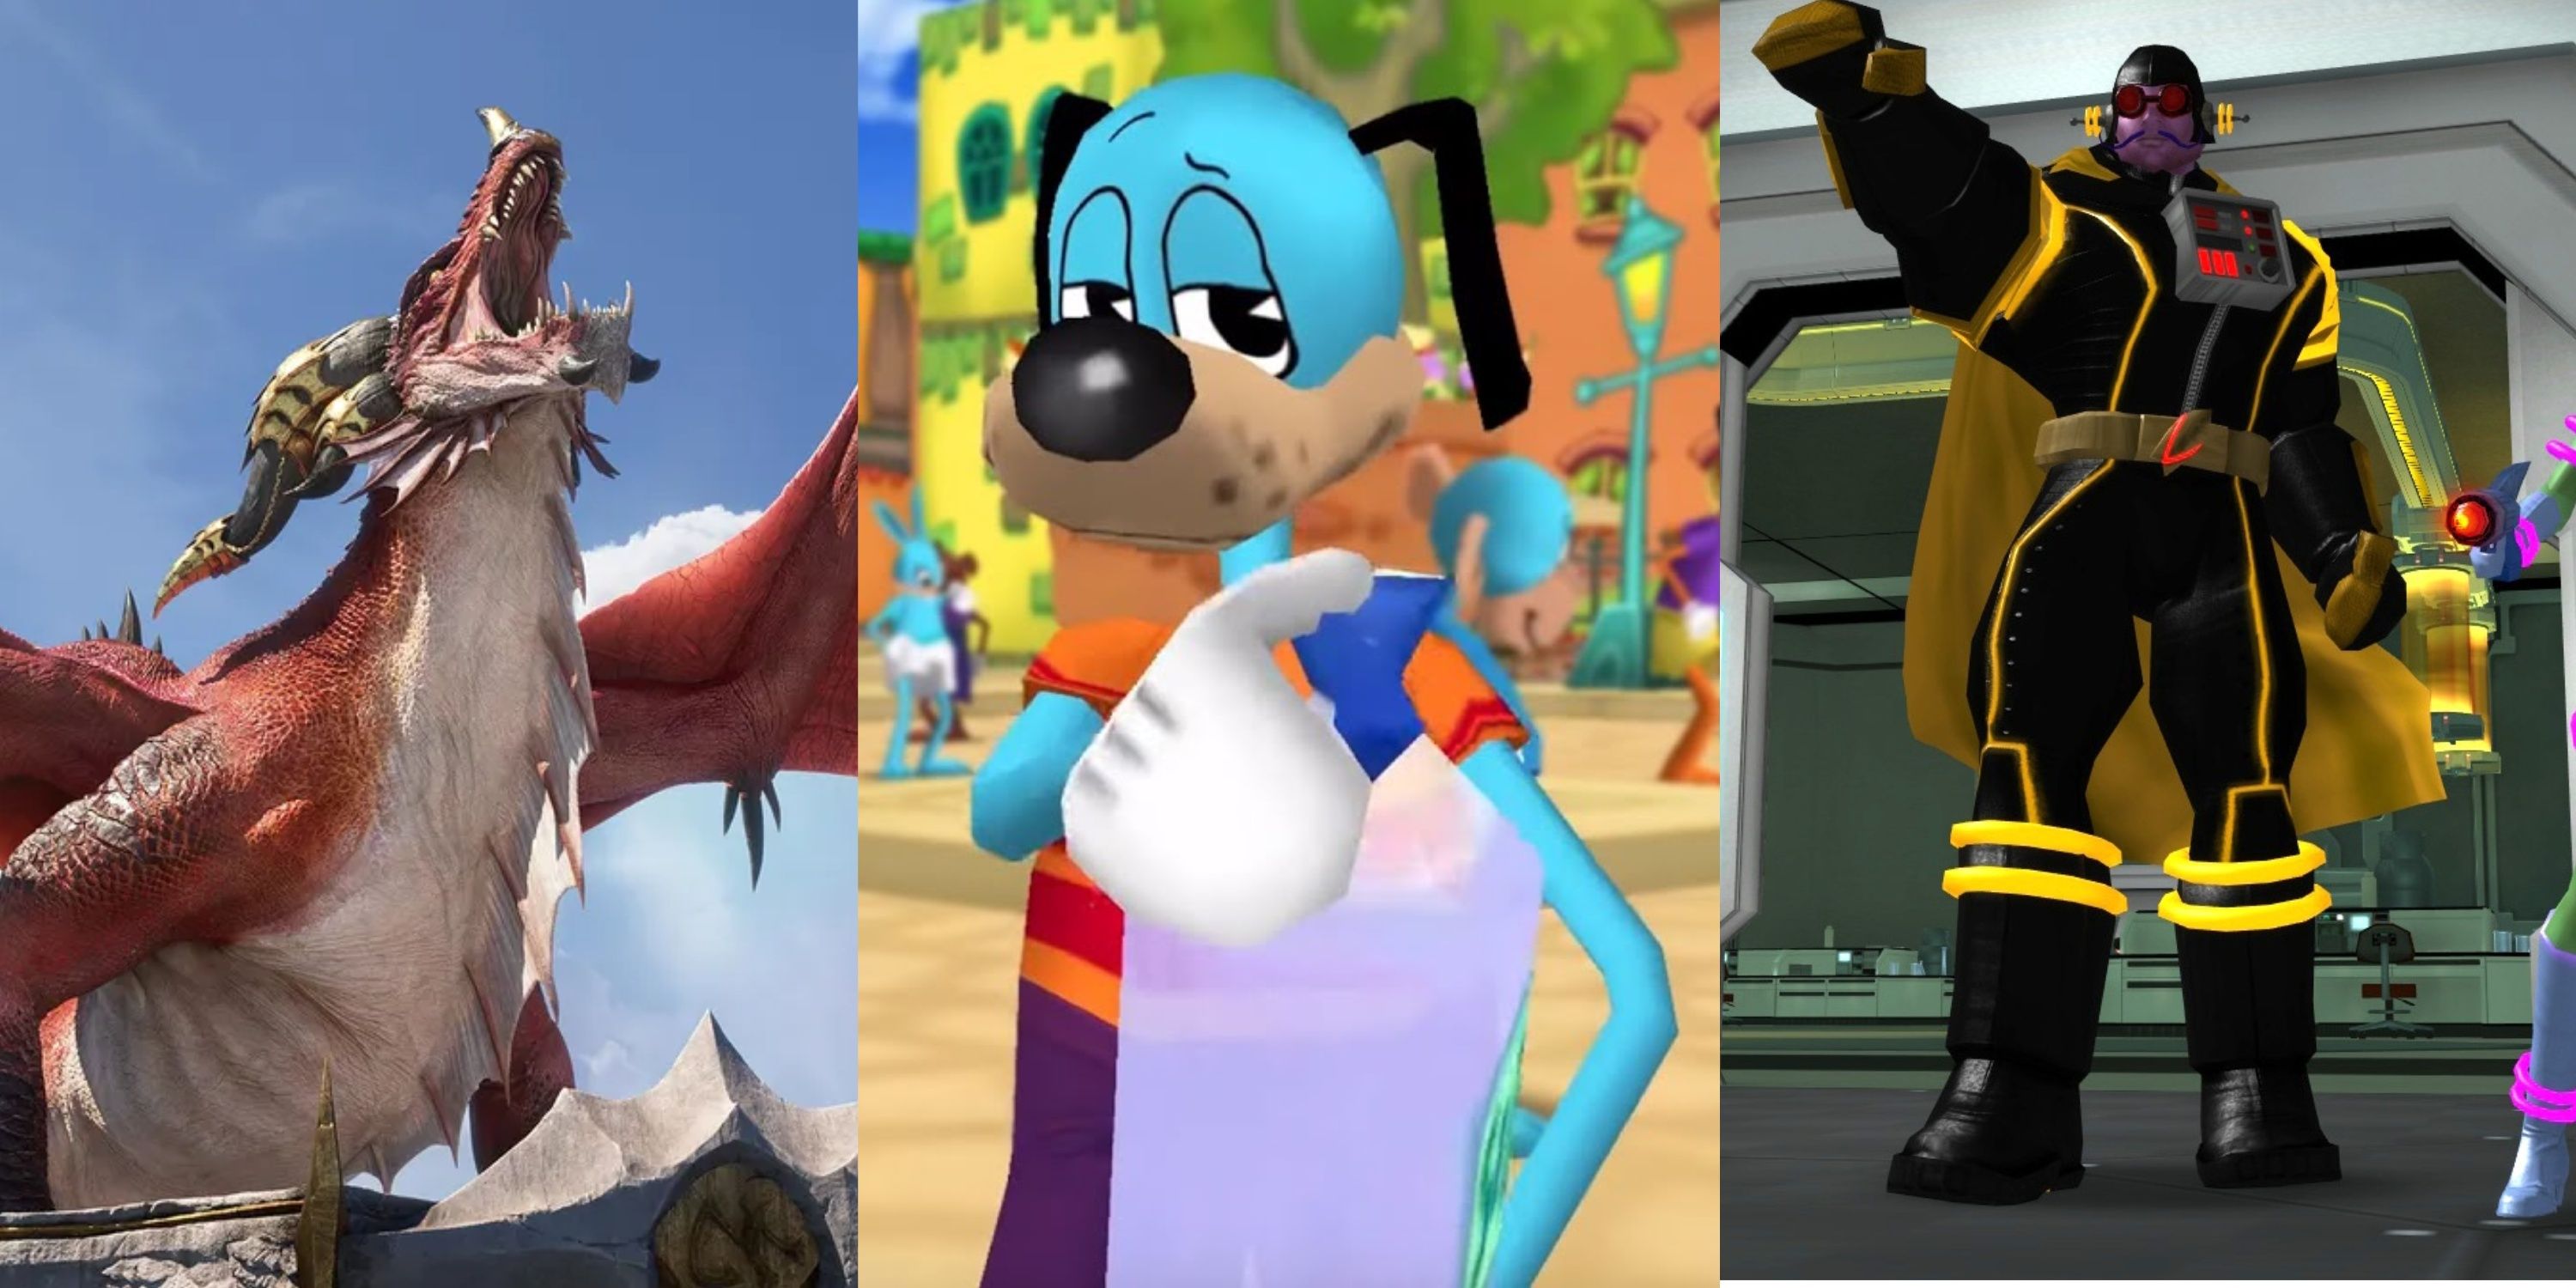 A split image featuring characters from World of Warcraft, Toontown, and City of Heroes